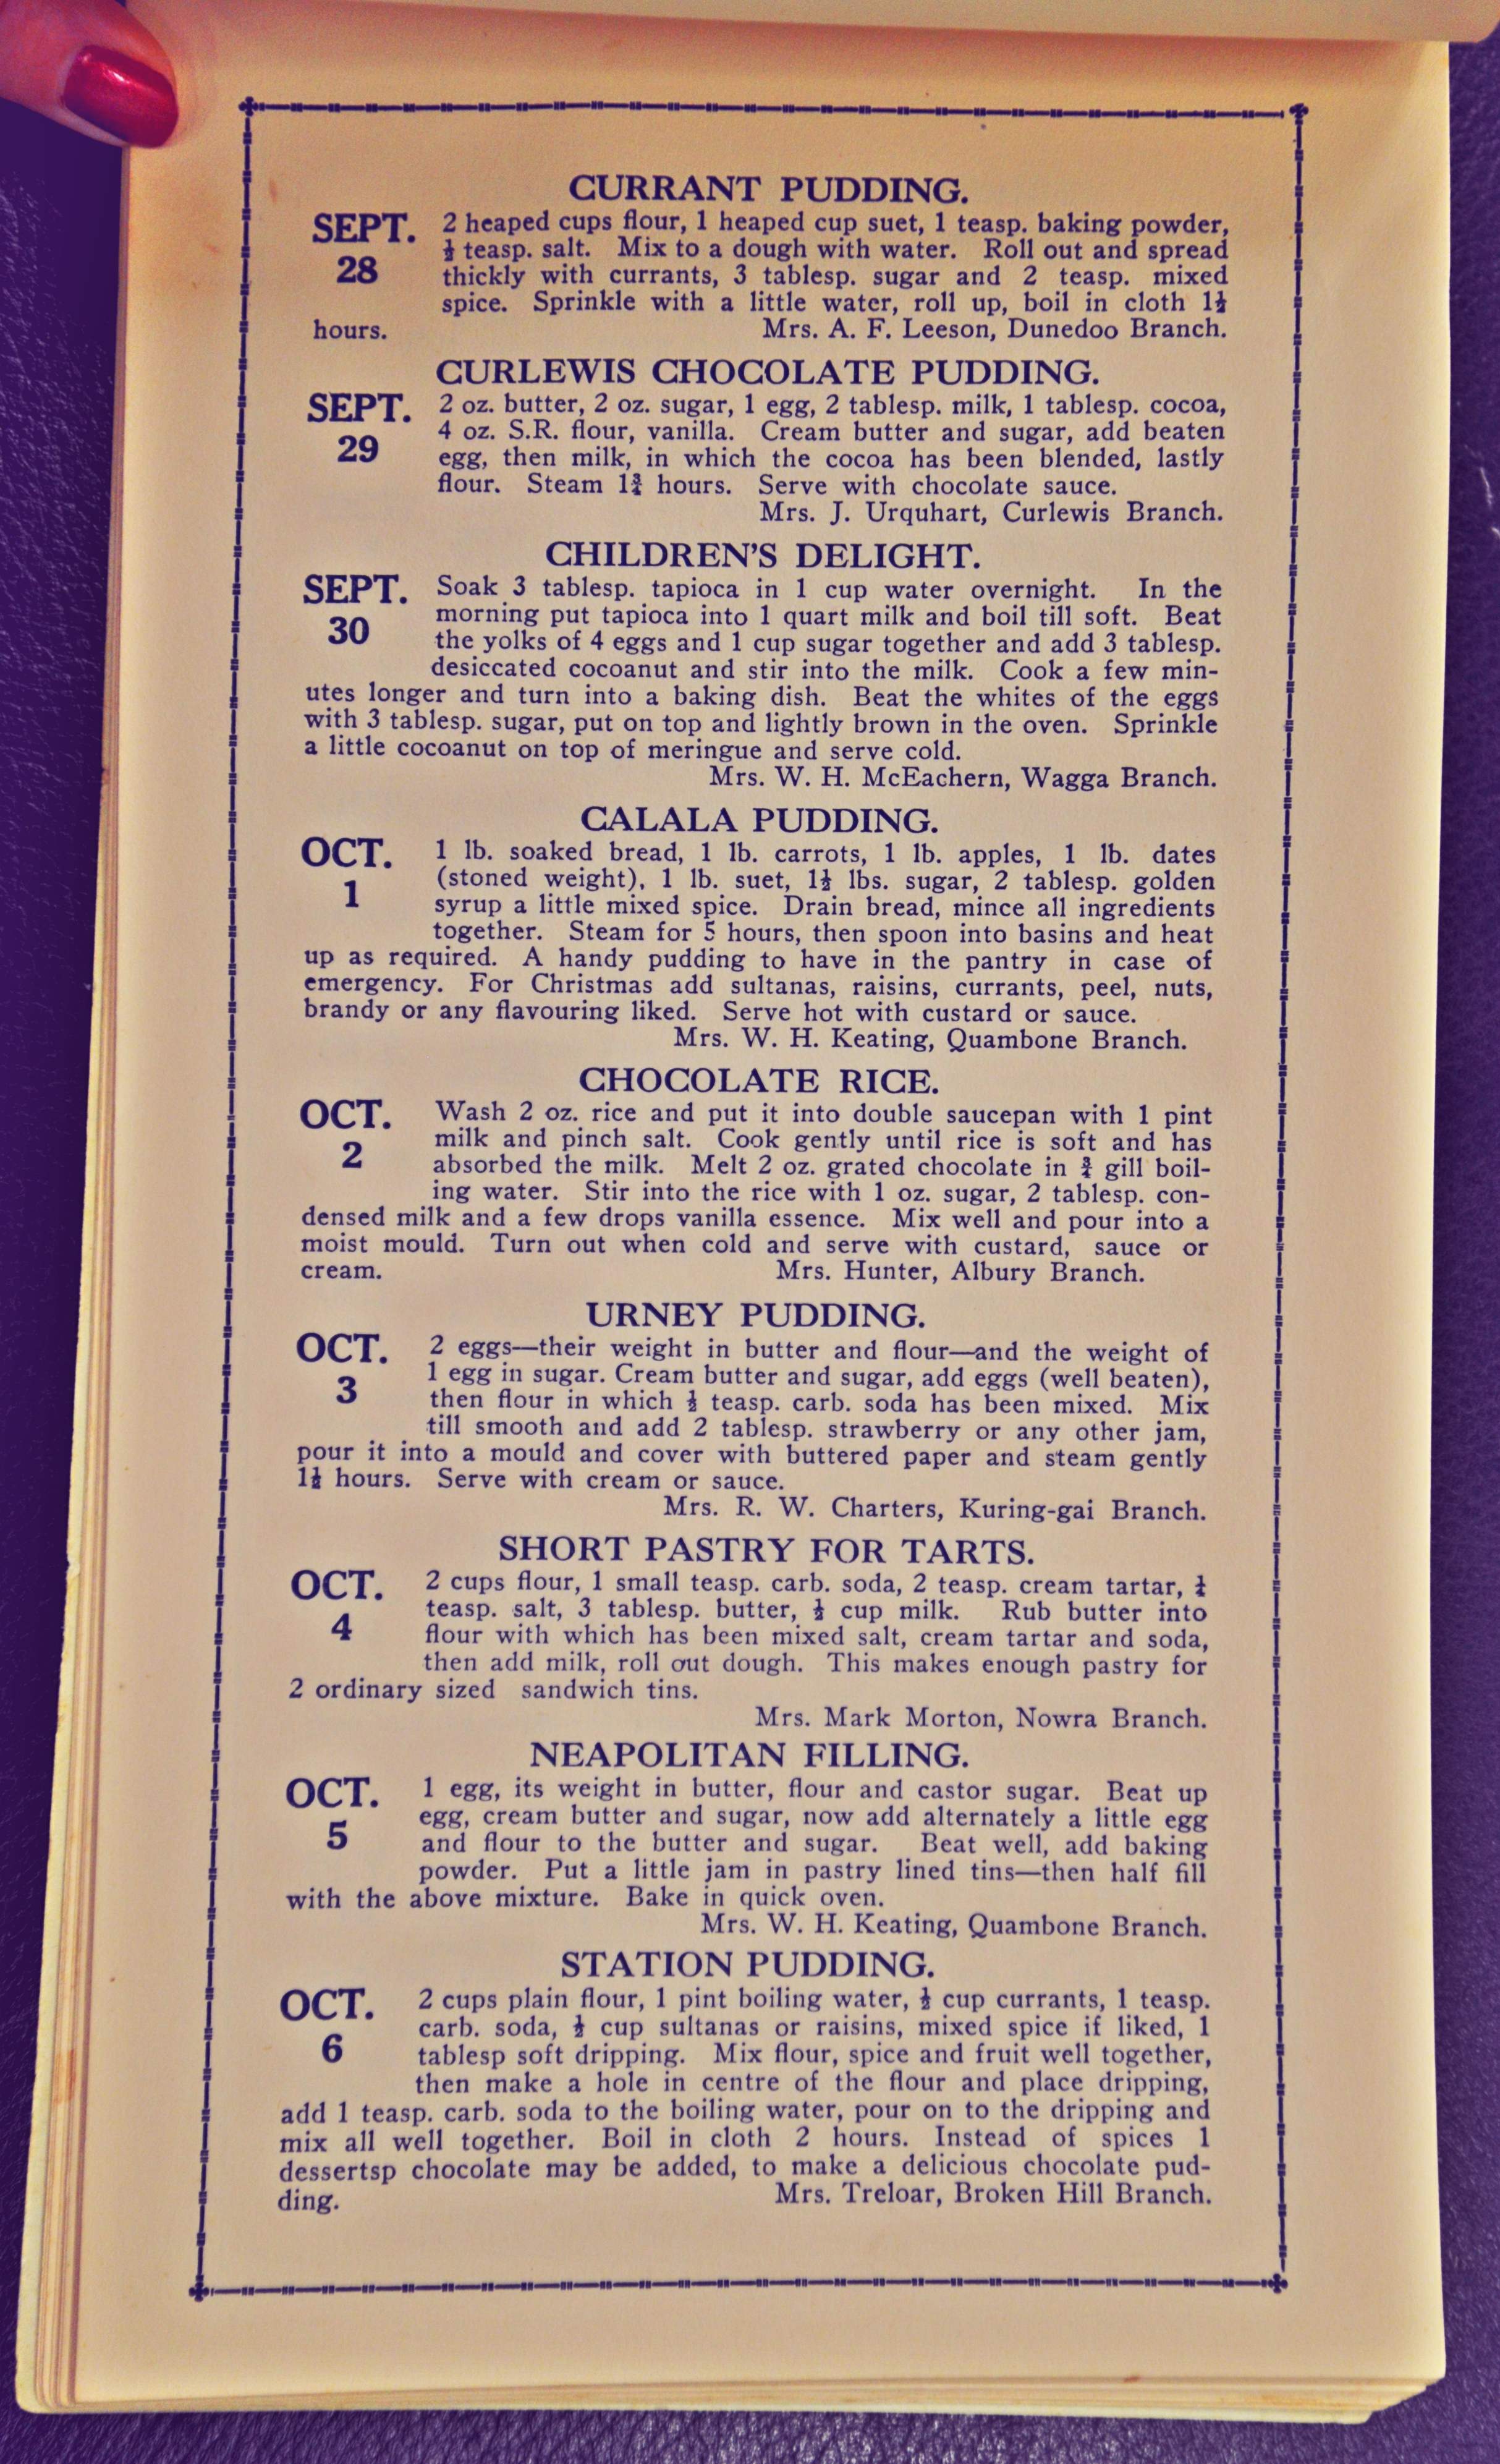 Country Women's Association of New South Wales calendar of puddings : a recipe for each day of the year (28 Sep - 6 Oct)